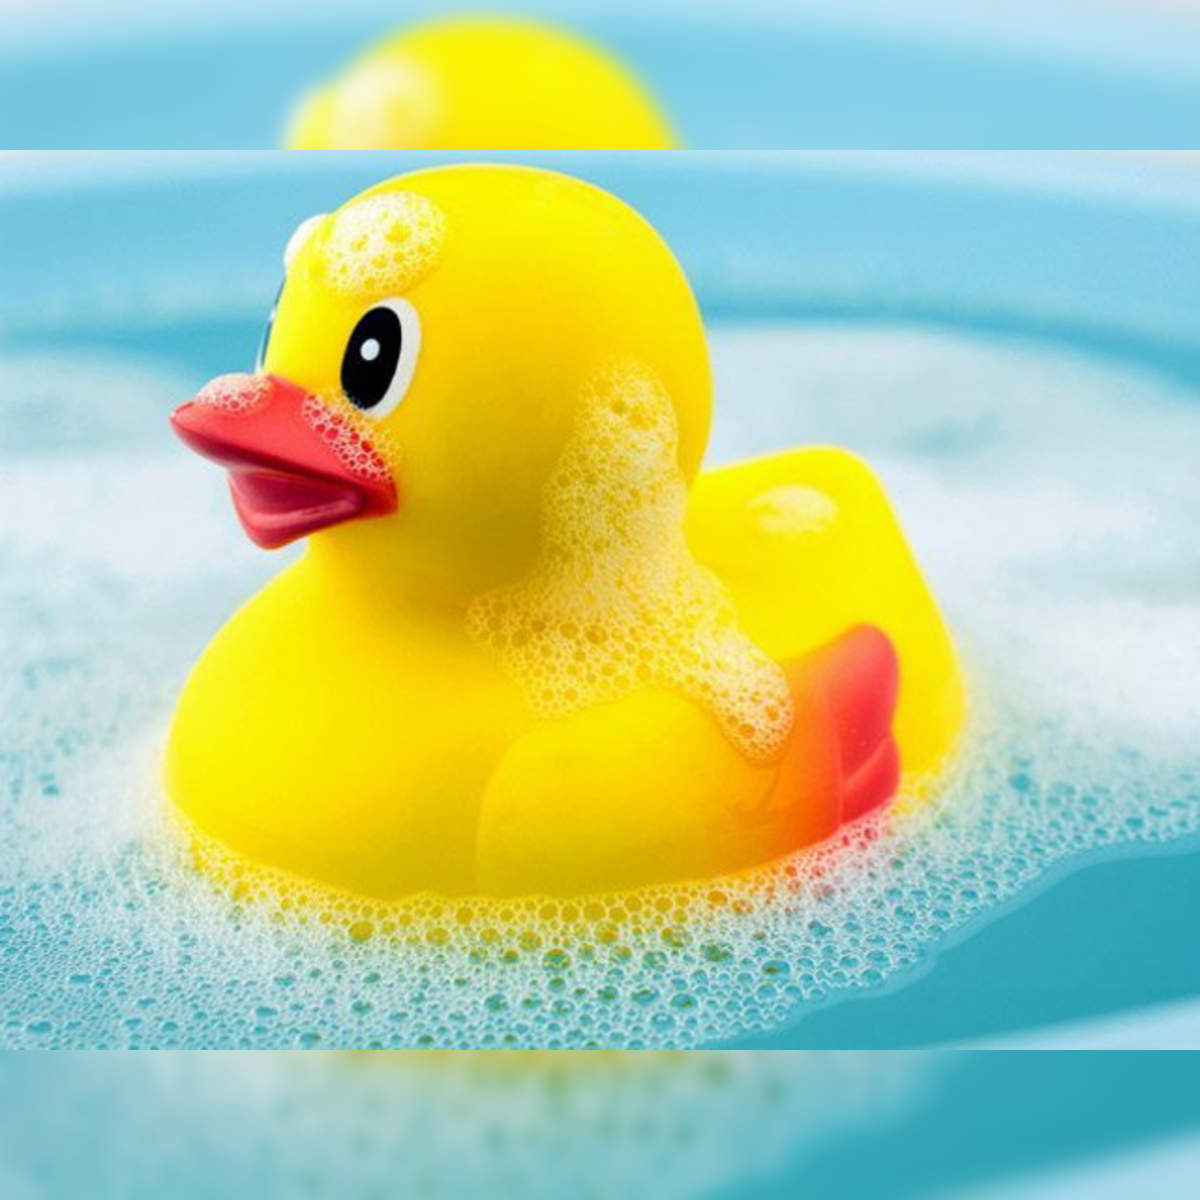 Scientists uncover disgusting truth about rubber duckies